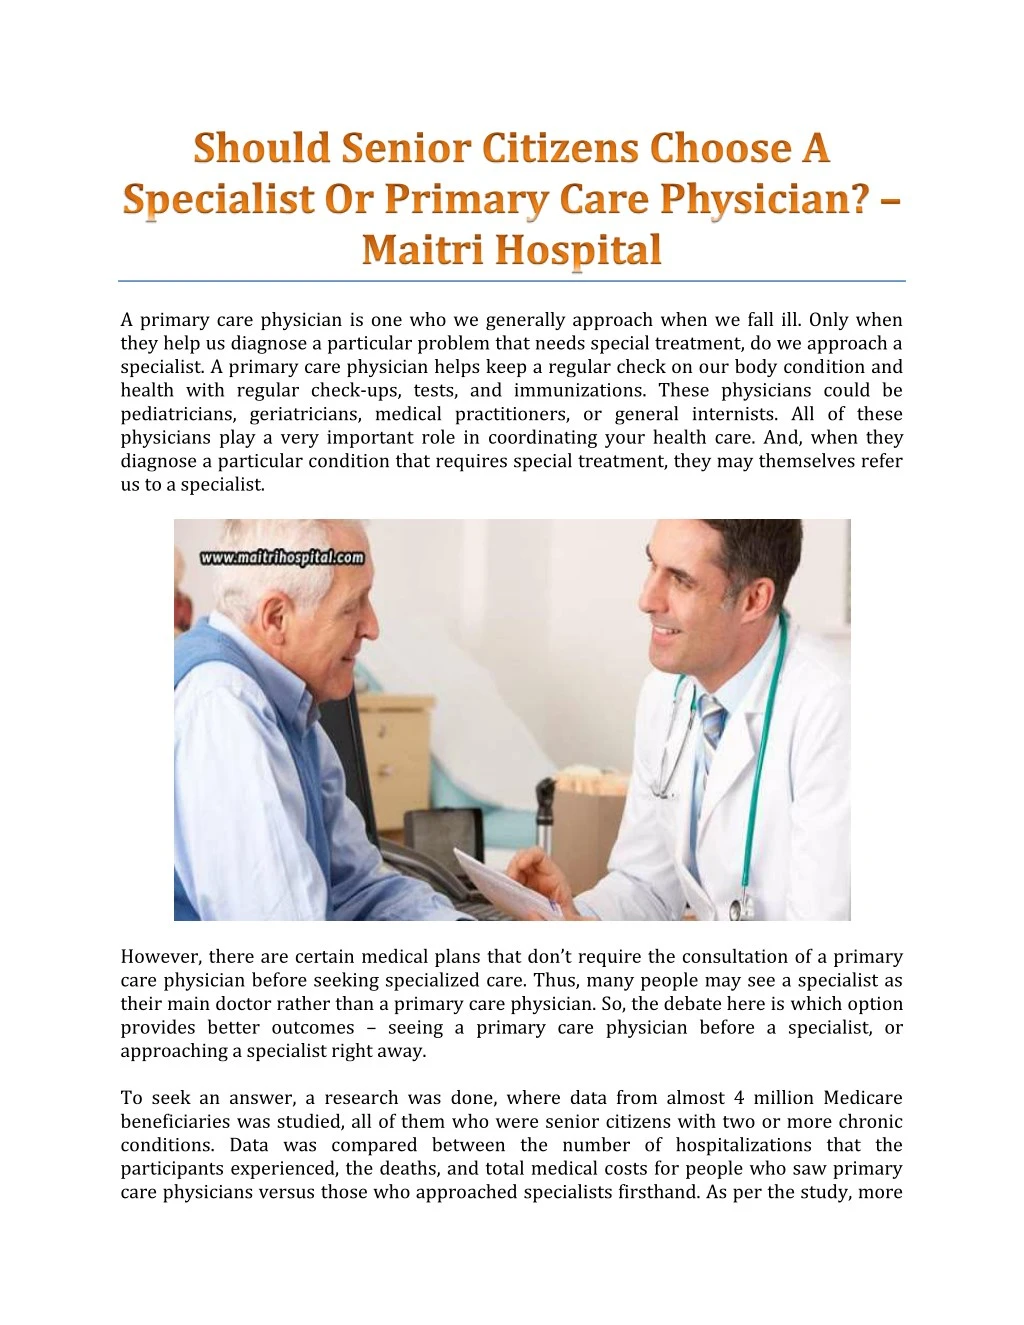 a primary care physician is one who we generally